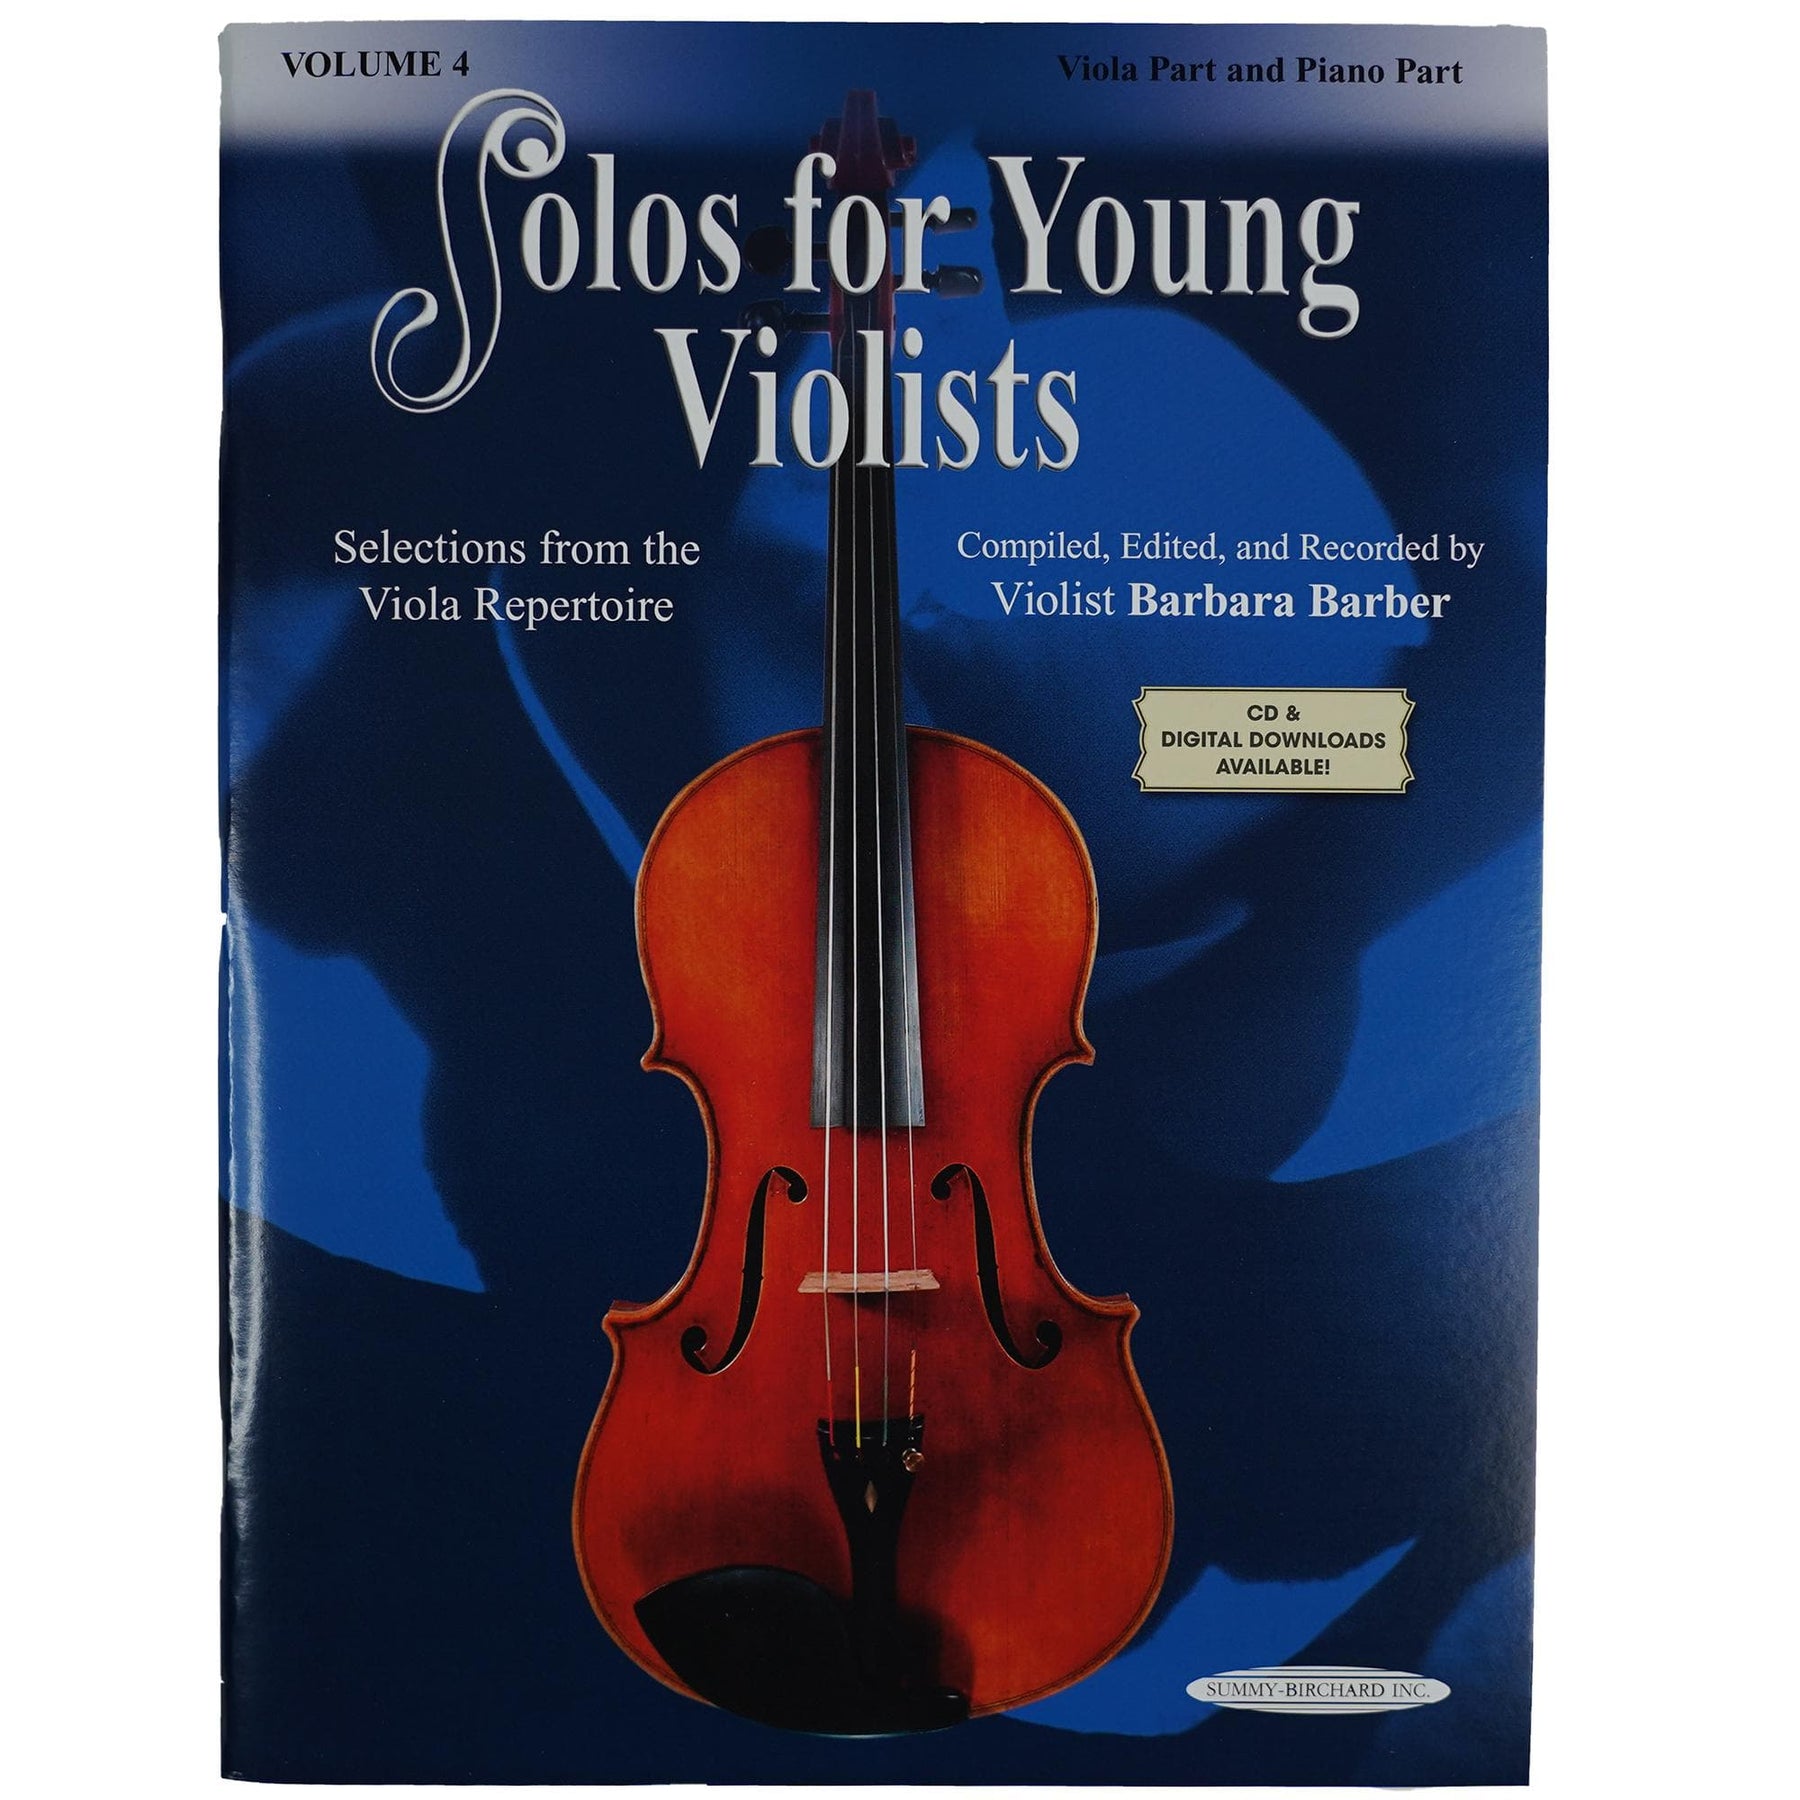 Solos for Young Violists Volume 4 for Viola and Piano by Barbara Barber - Summy-Birchard Publication